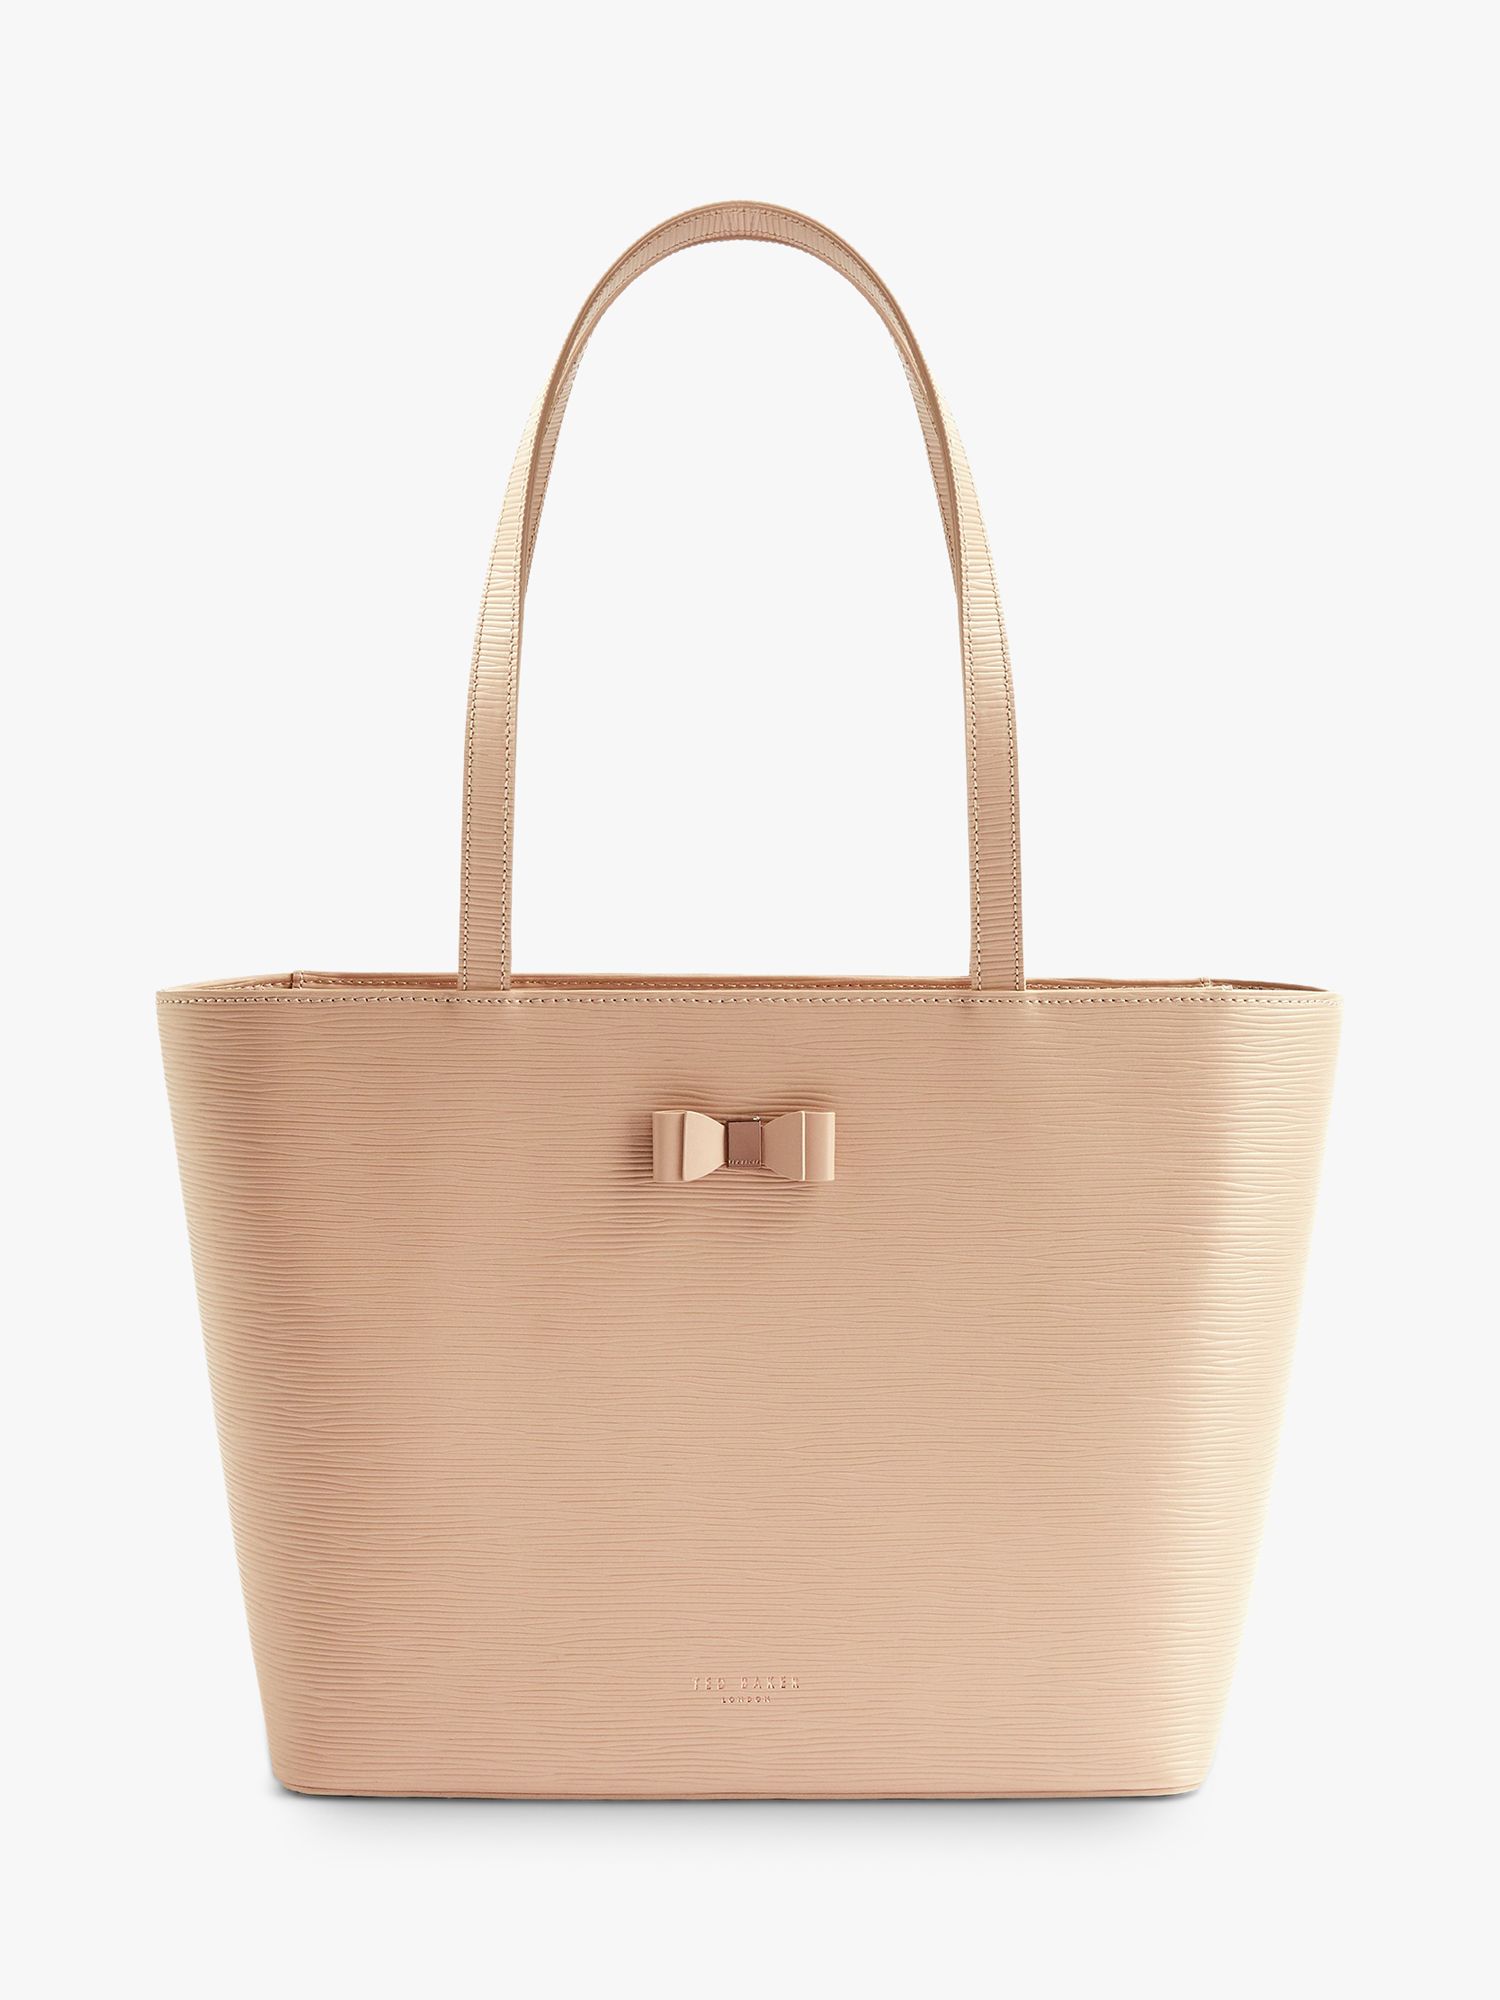 Ted Baker Deannah Textured Leather Tote Bag